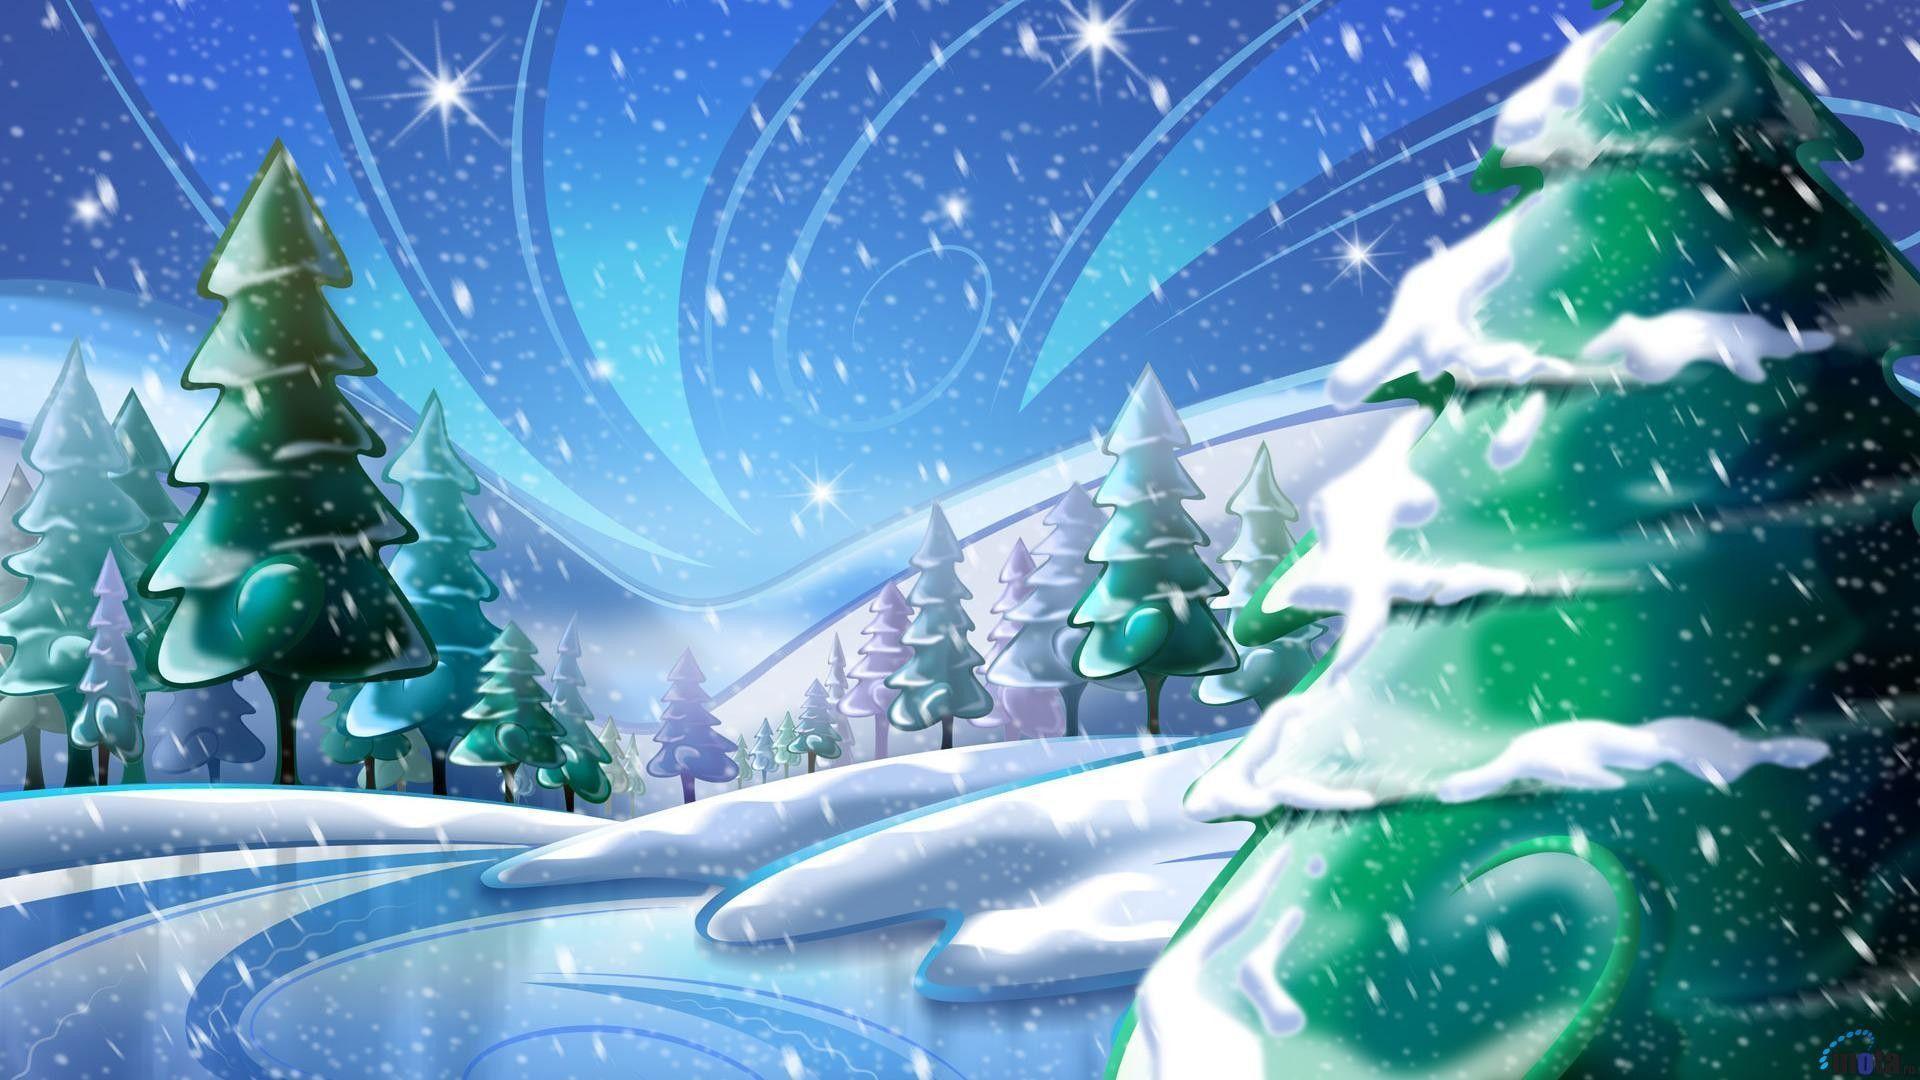 Snow Animated Gif HD Wallpaper For Desktop Background